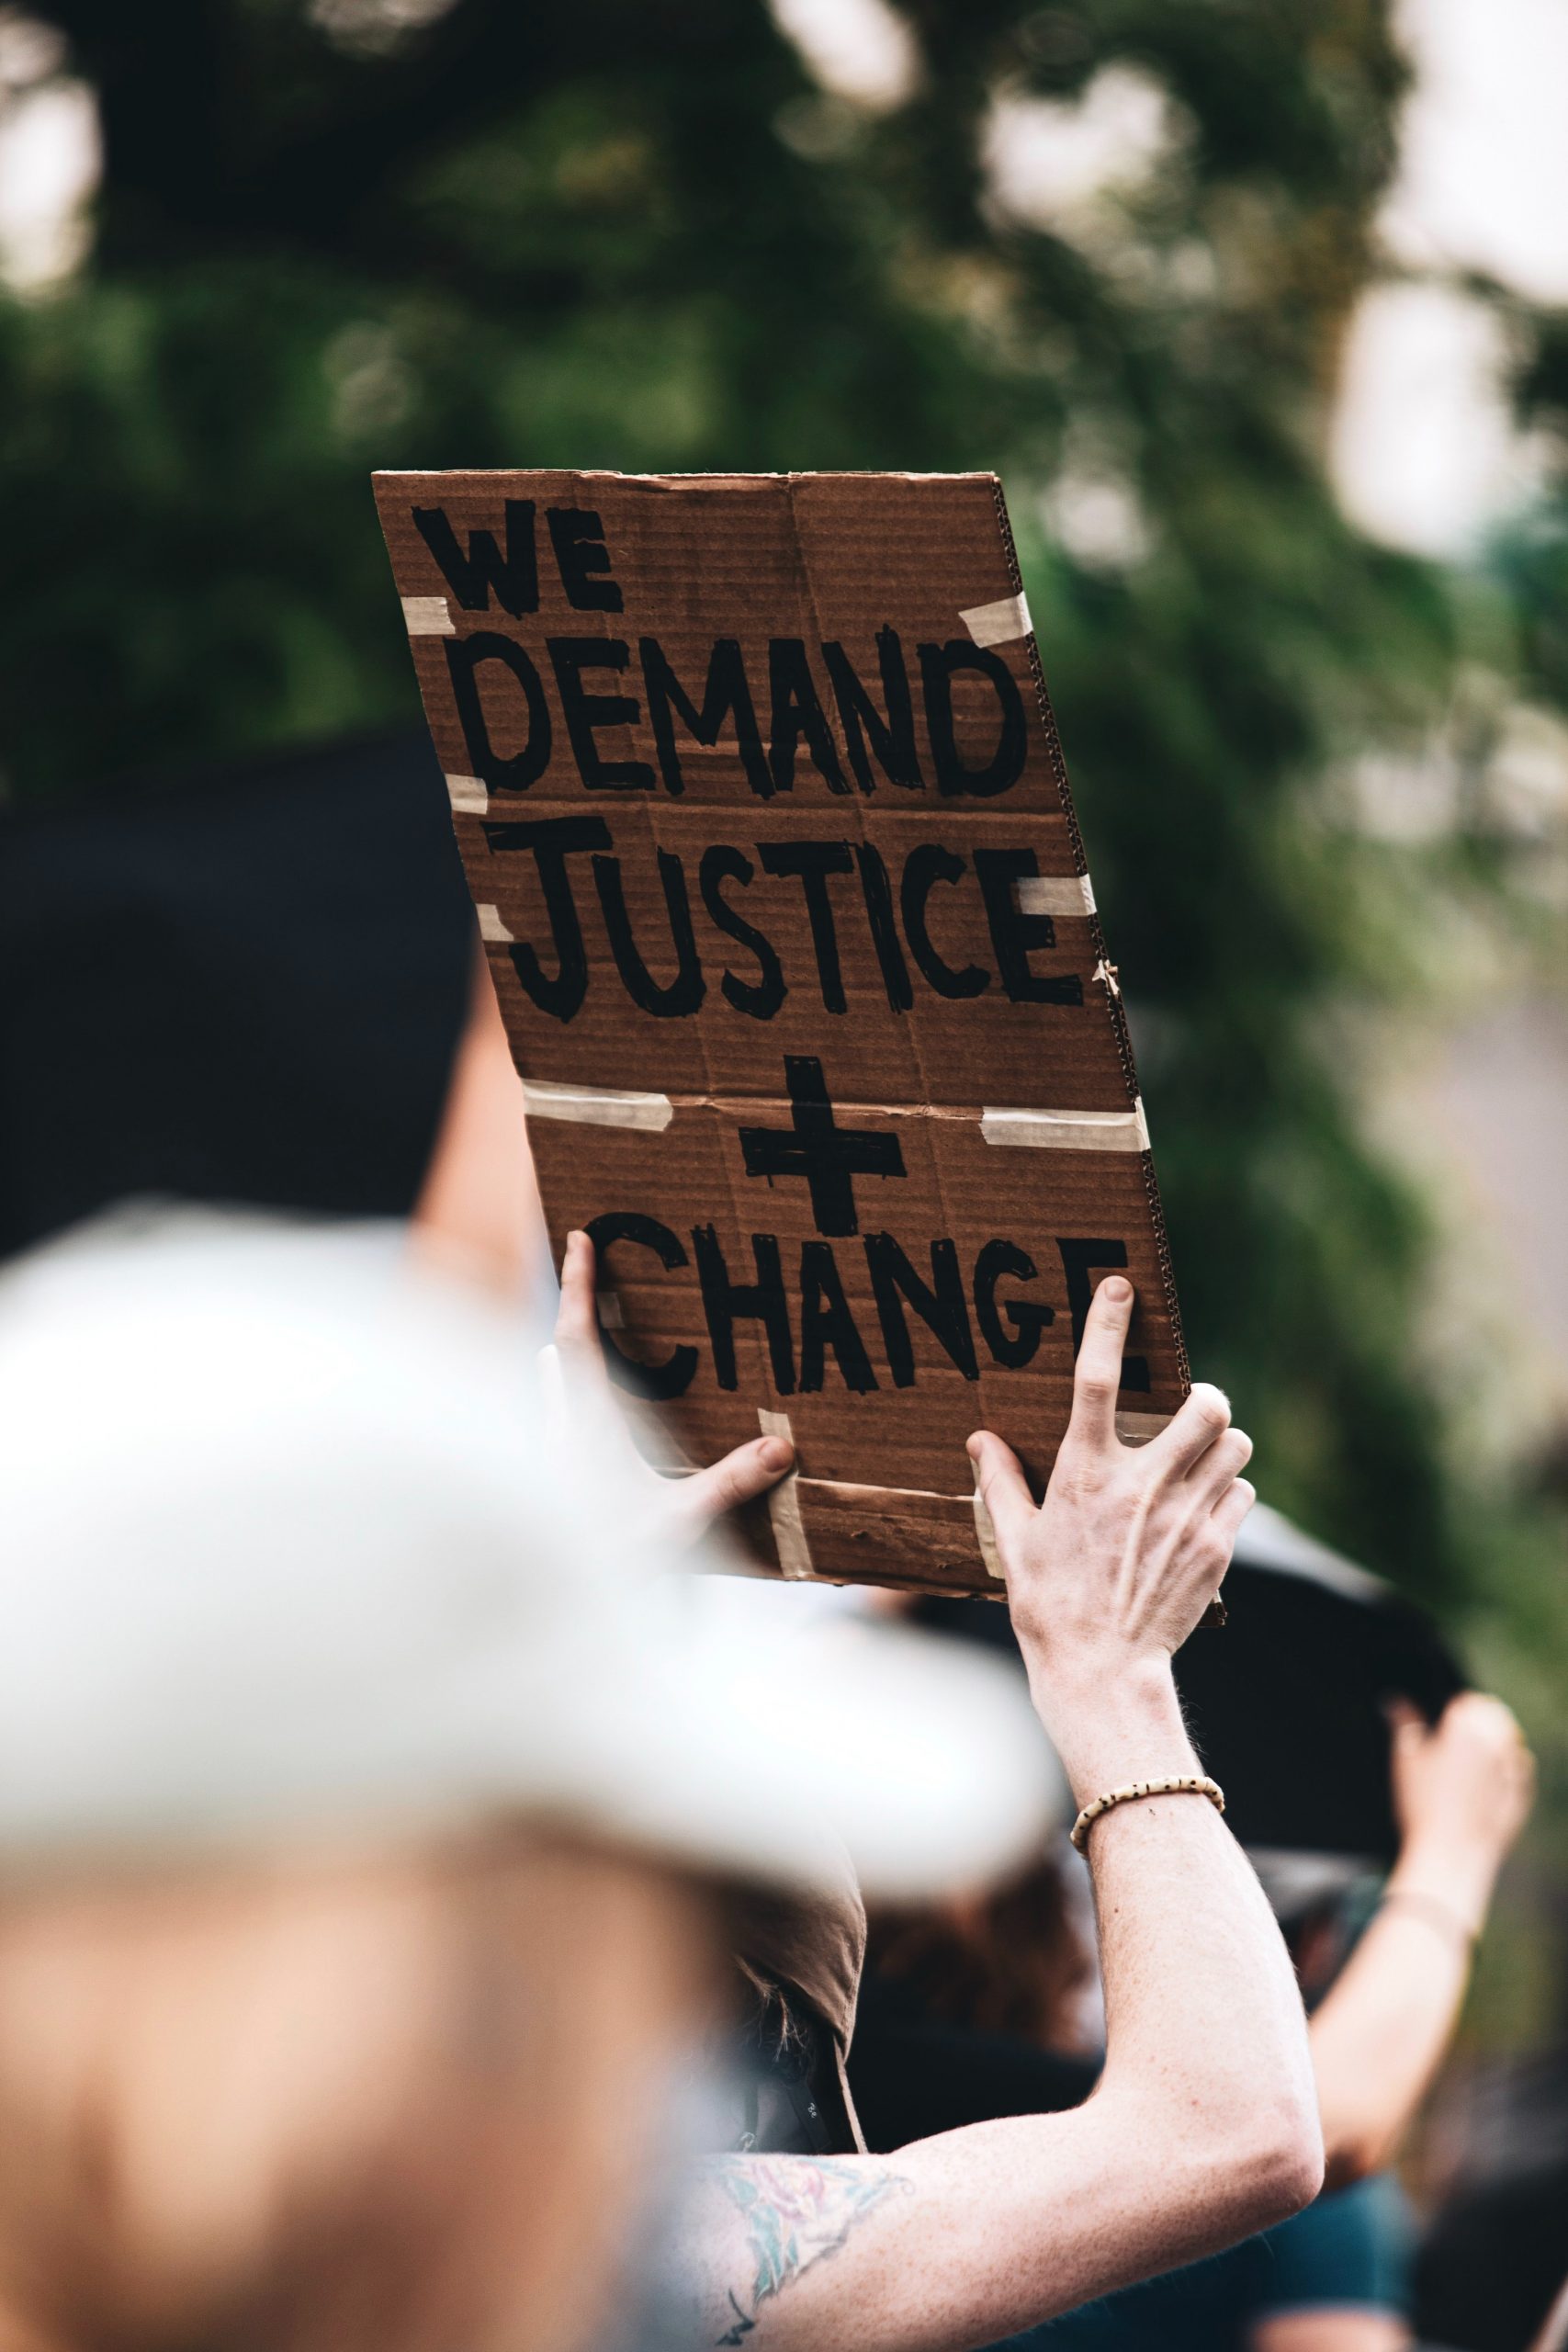 A person holds a sign aloft during a protest. Only their arms can be seen and the sign reads "we demand justice + change" in capital letters